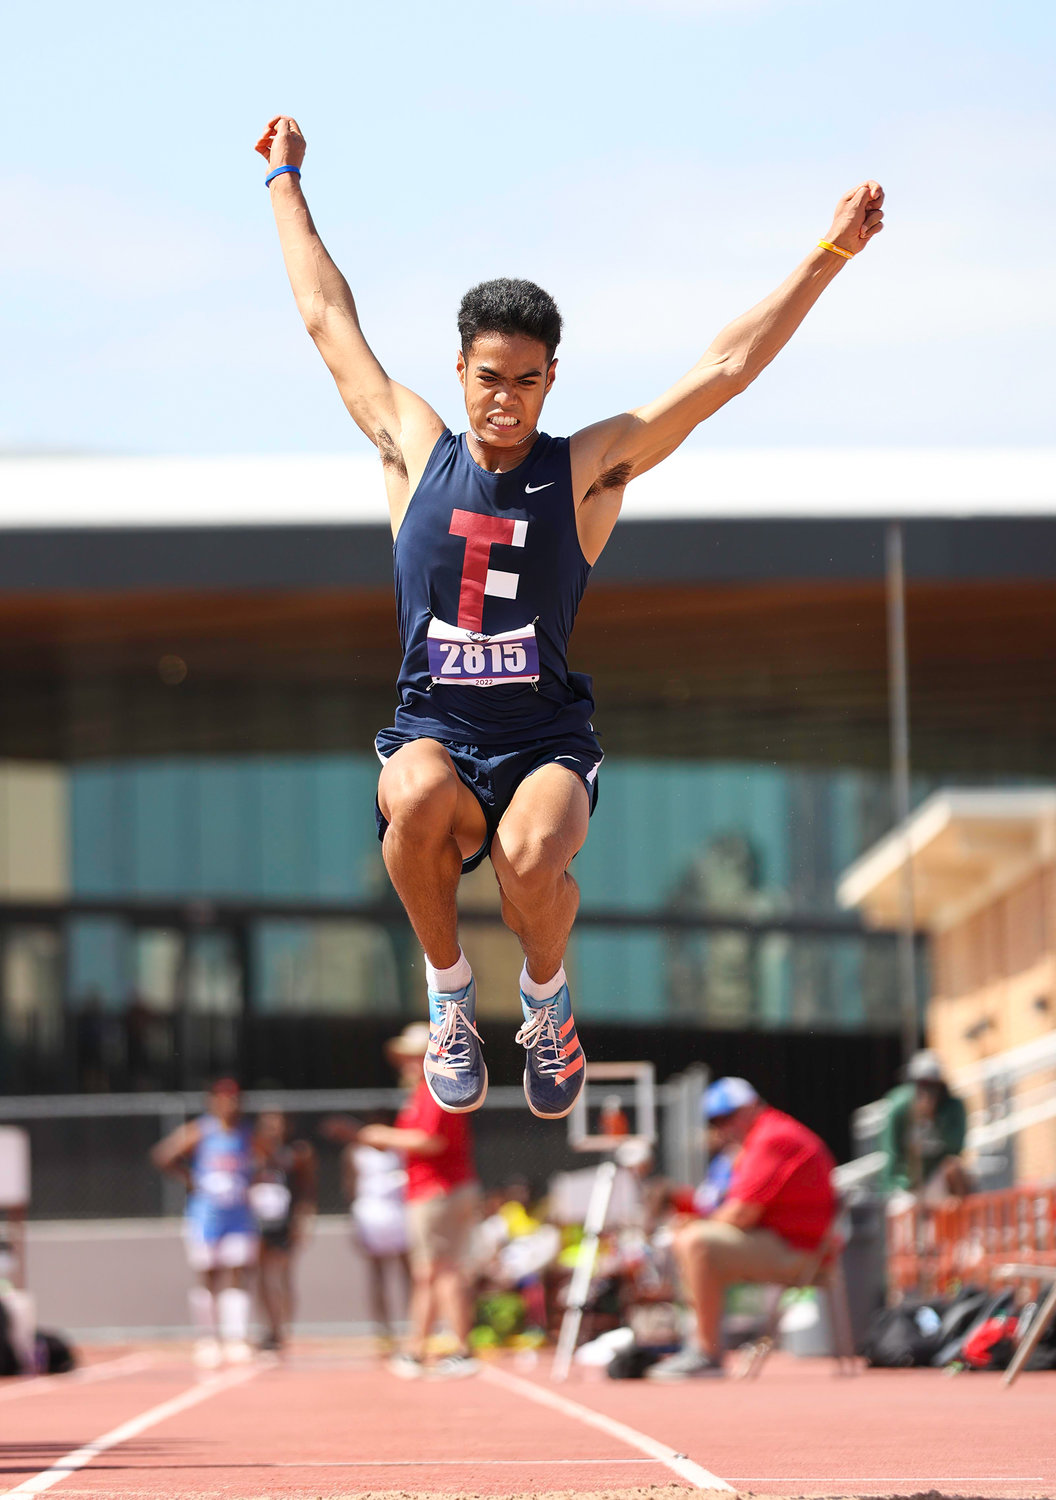 Jayden Keys of Katy Tompkins competes in the Class 6A boys long jump event at the UIL State Track and Field Meet on May 14, 2022 in Austin, Texas.